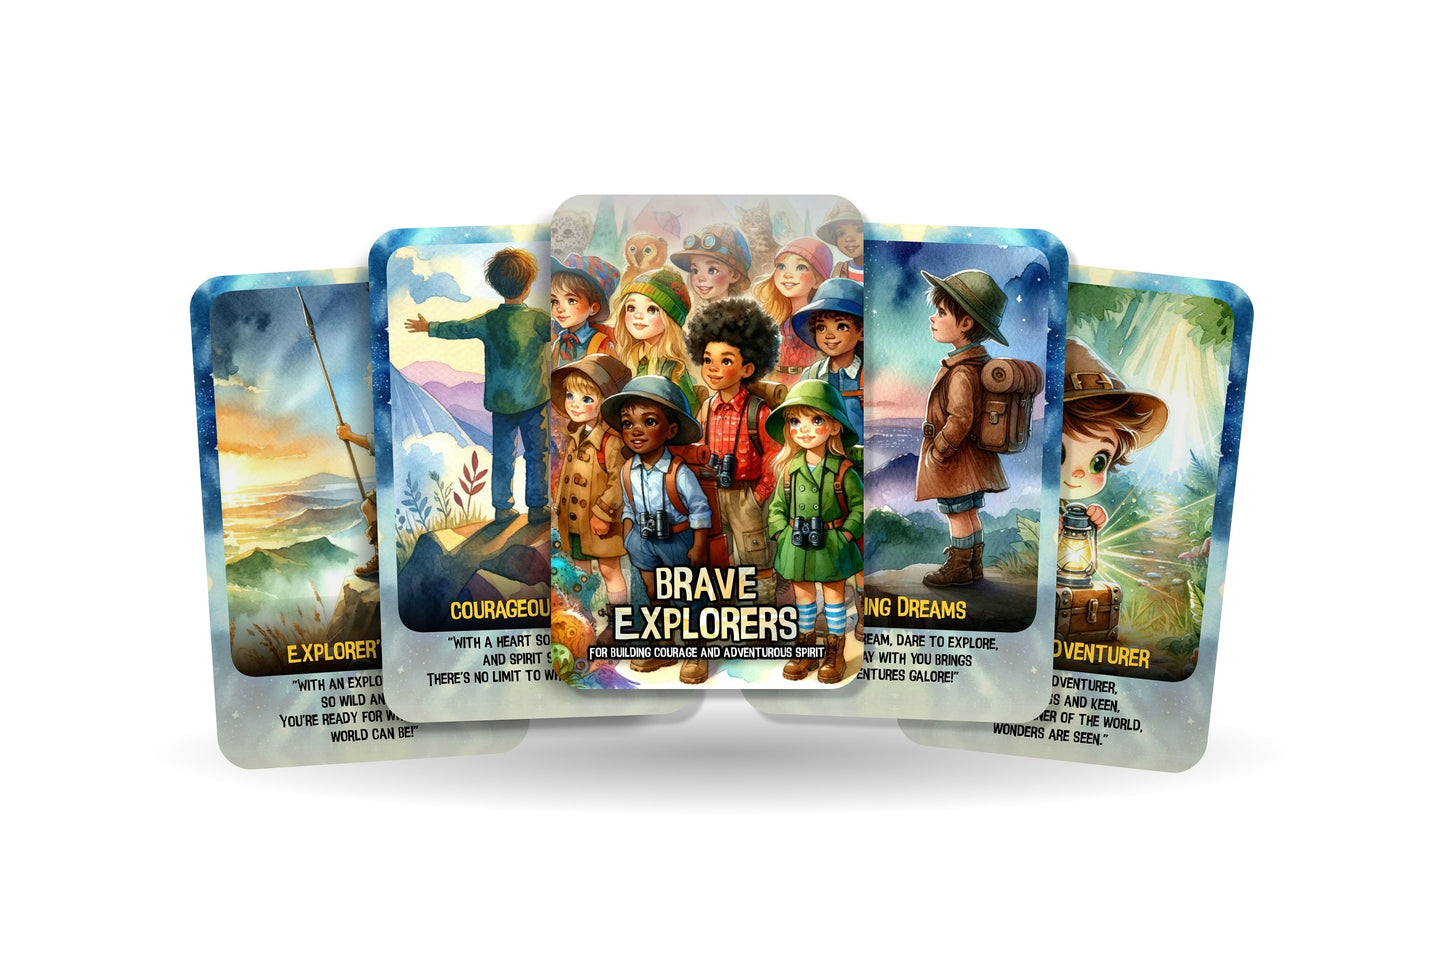 Brave Explorers - For Building Courage and Adventurous Spirit, Kids Affirmation Cards